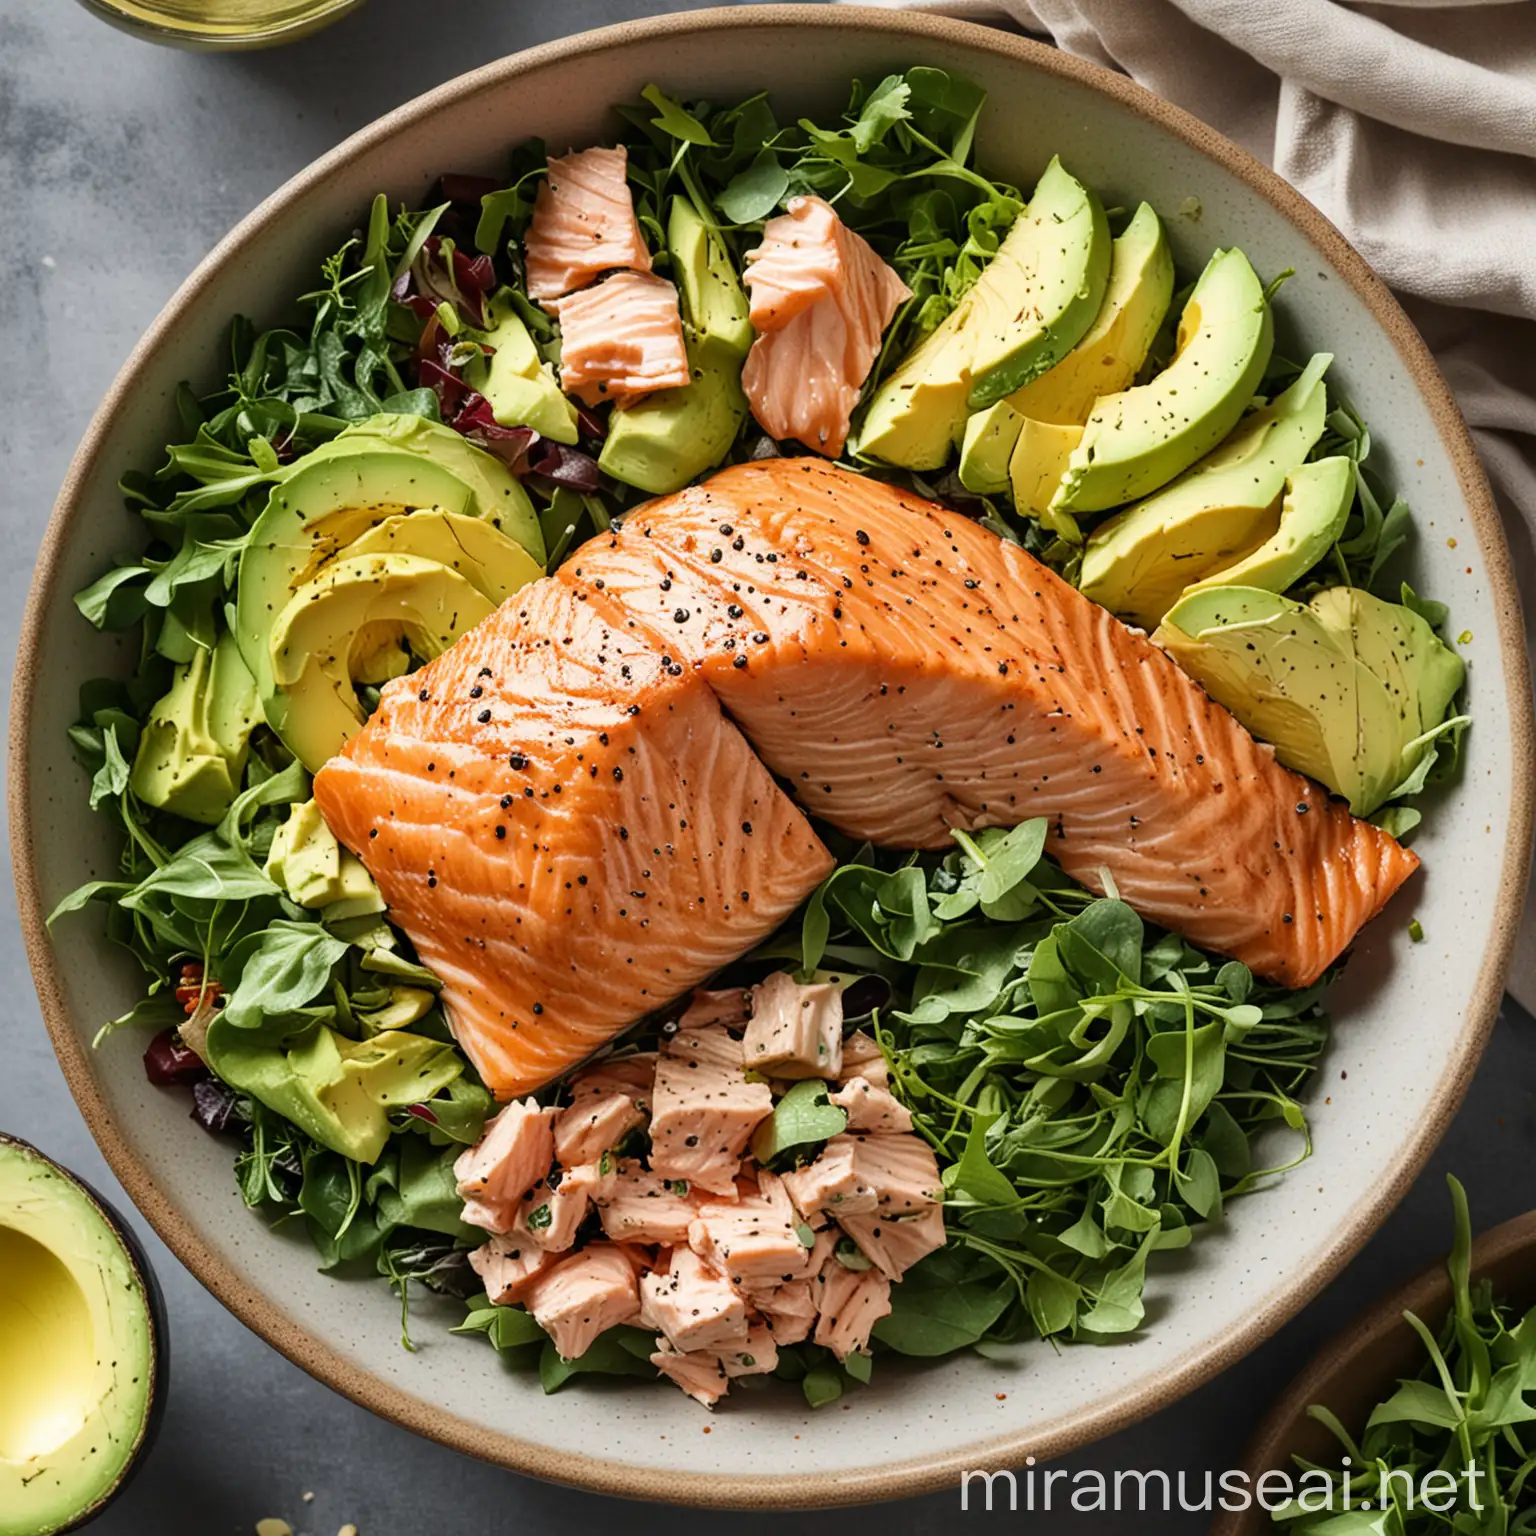 A picture of a delicious salmon salad bowl, featuring mixed greens, avocado, and a salmon fillet.

